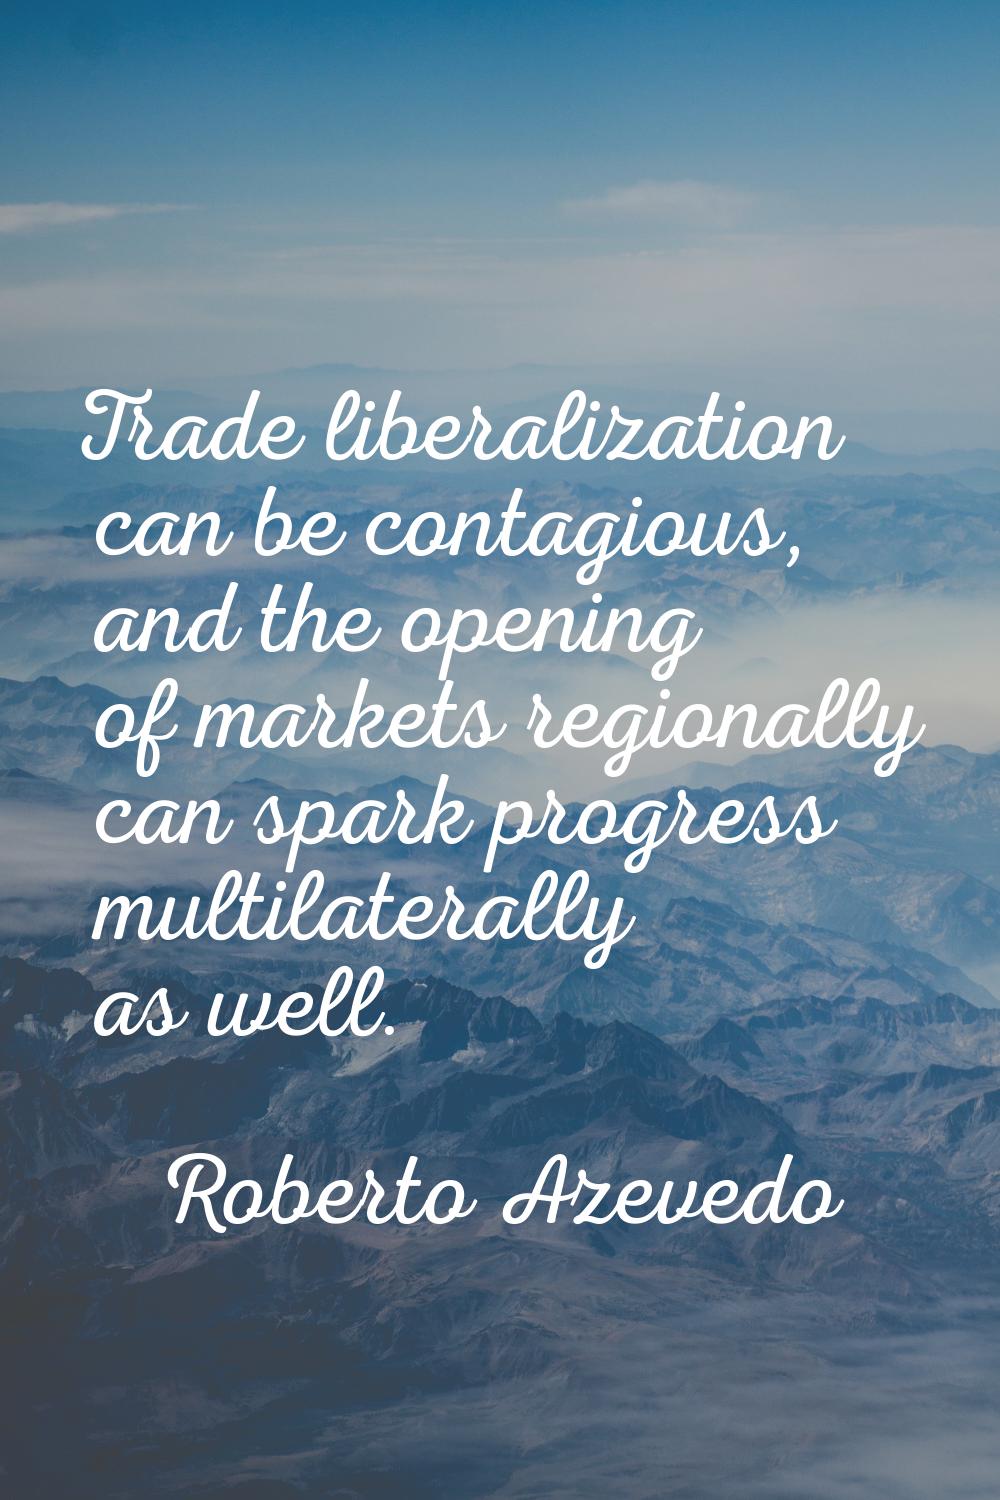 Trade liberalization can be contagious, and the opening of markets regionally can spark progress mu